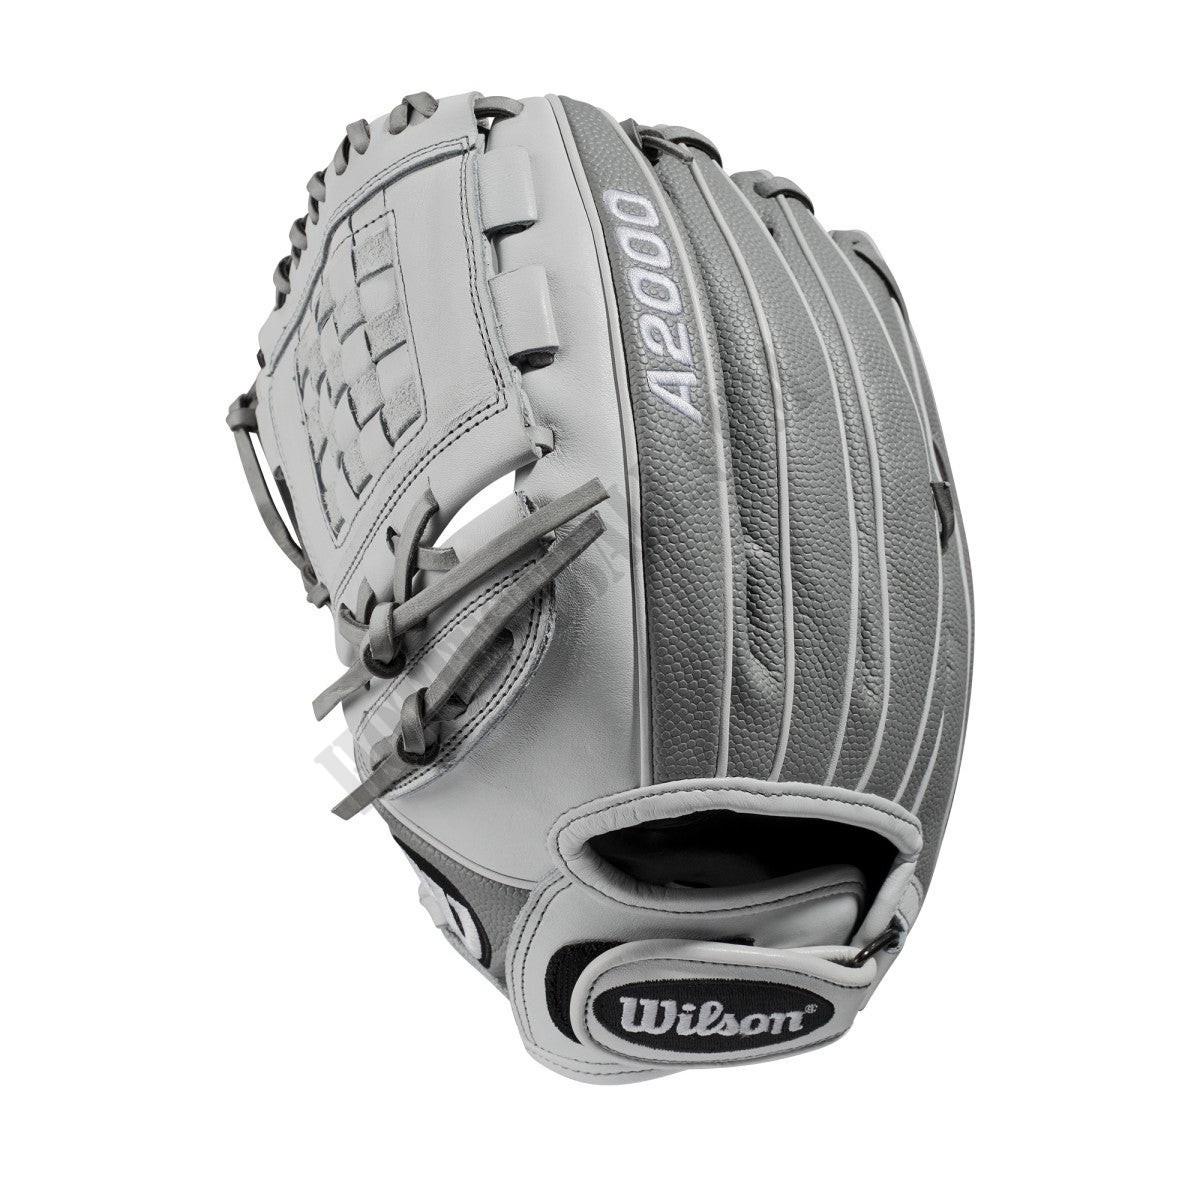 2019 A2000 P12 12" Pitcher's Fastpitch Glove ● Wilson Promotions - -9